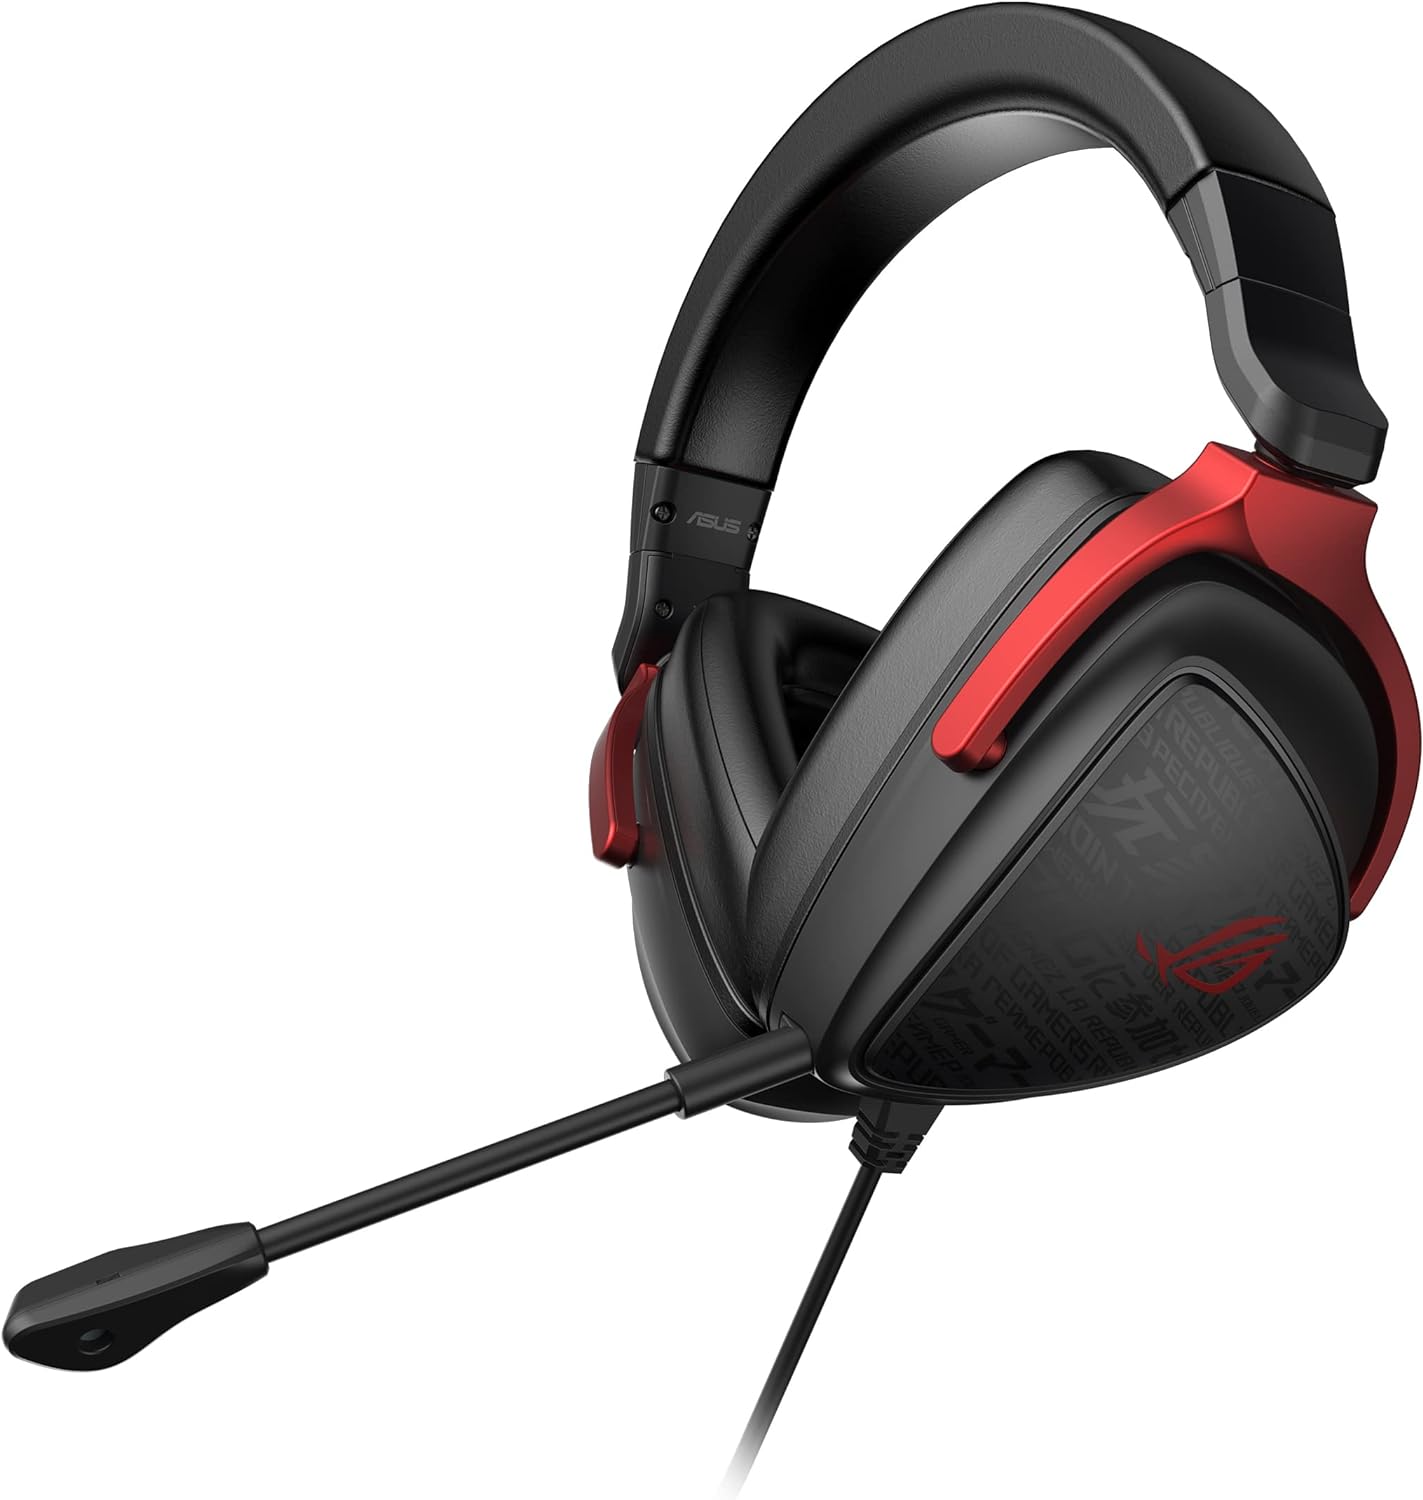 ASUS-ROG-Delta-S-Core-Wired-Gaming-Headset-Black-Best-Price-in-Pakistan